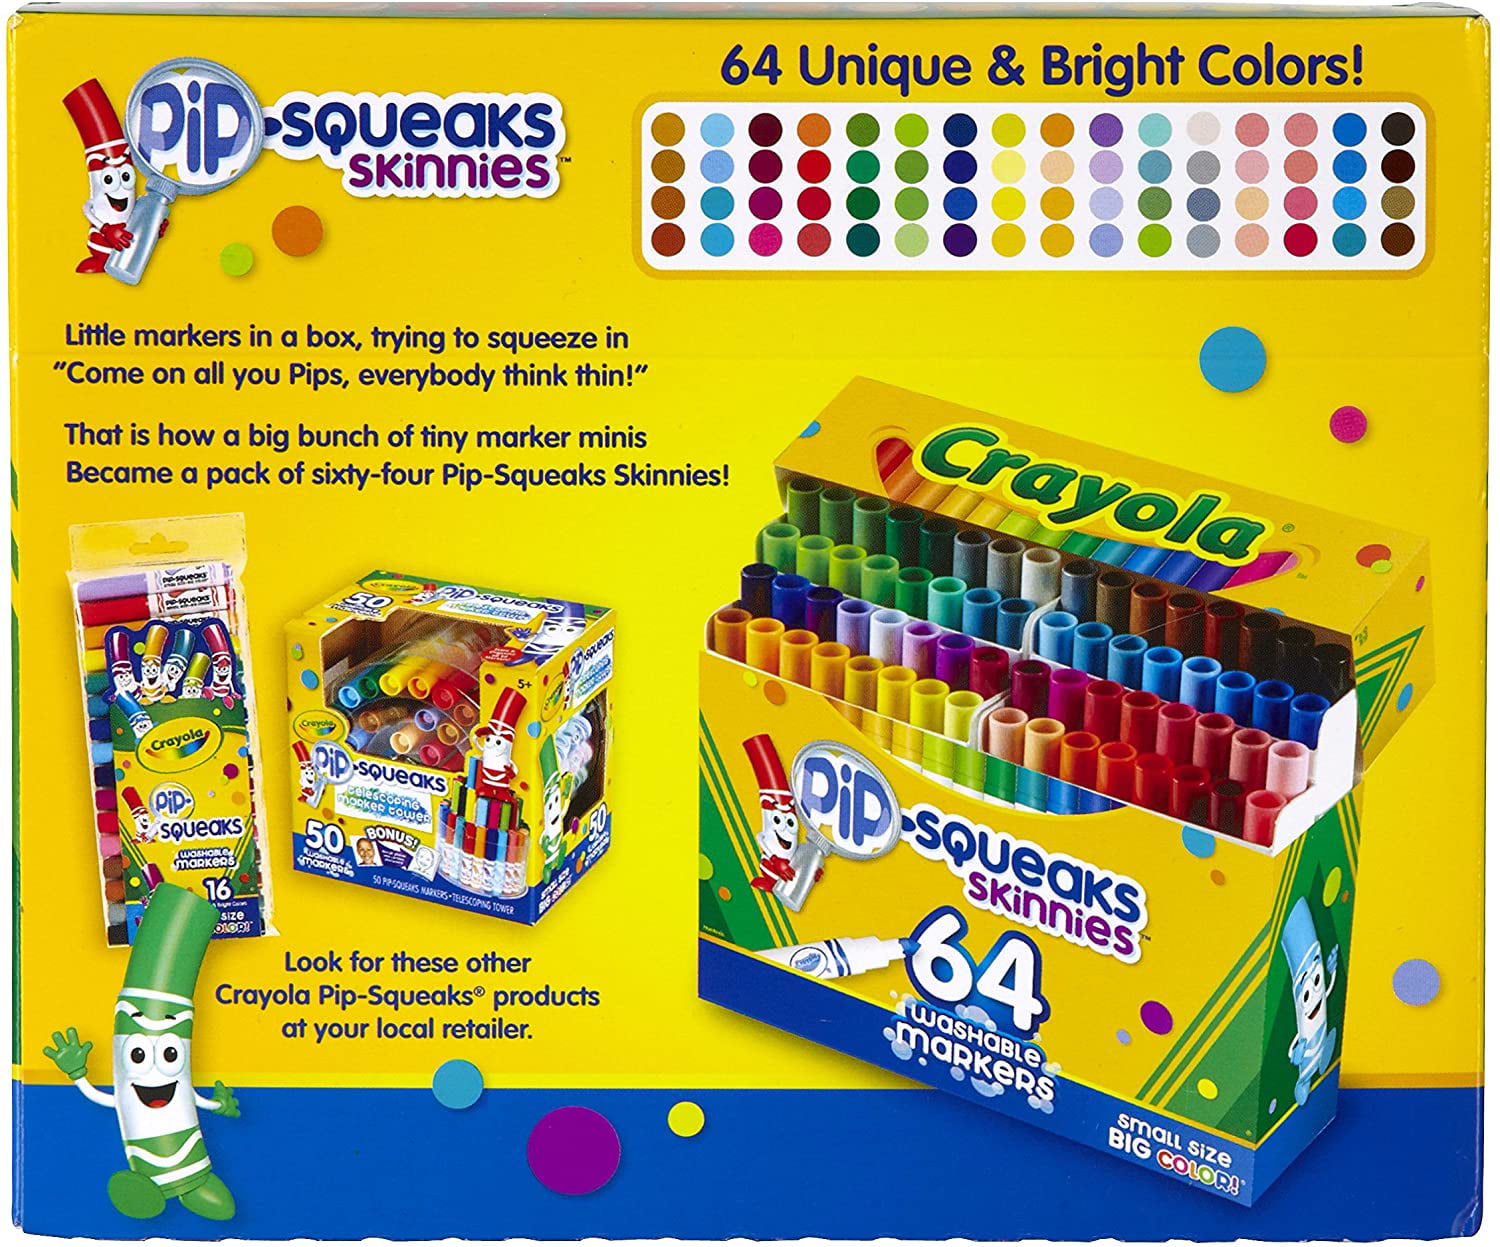 Crayola Pip-Squeaks Telescoping Marker Tower - 50 Count #Sponsored